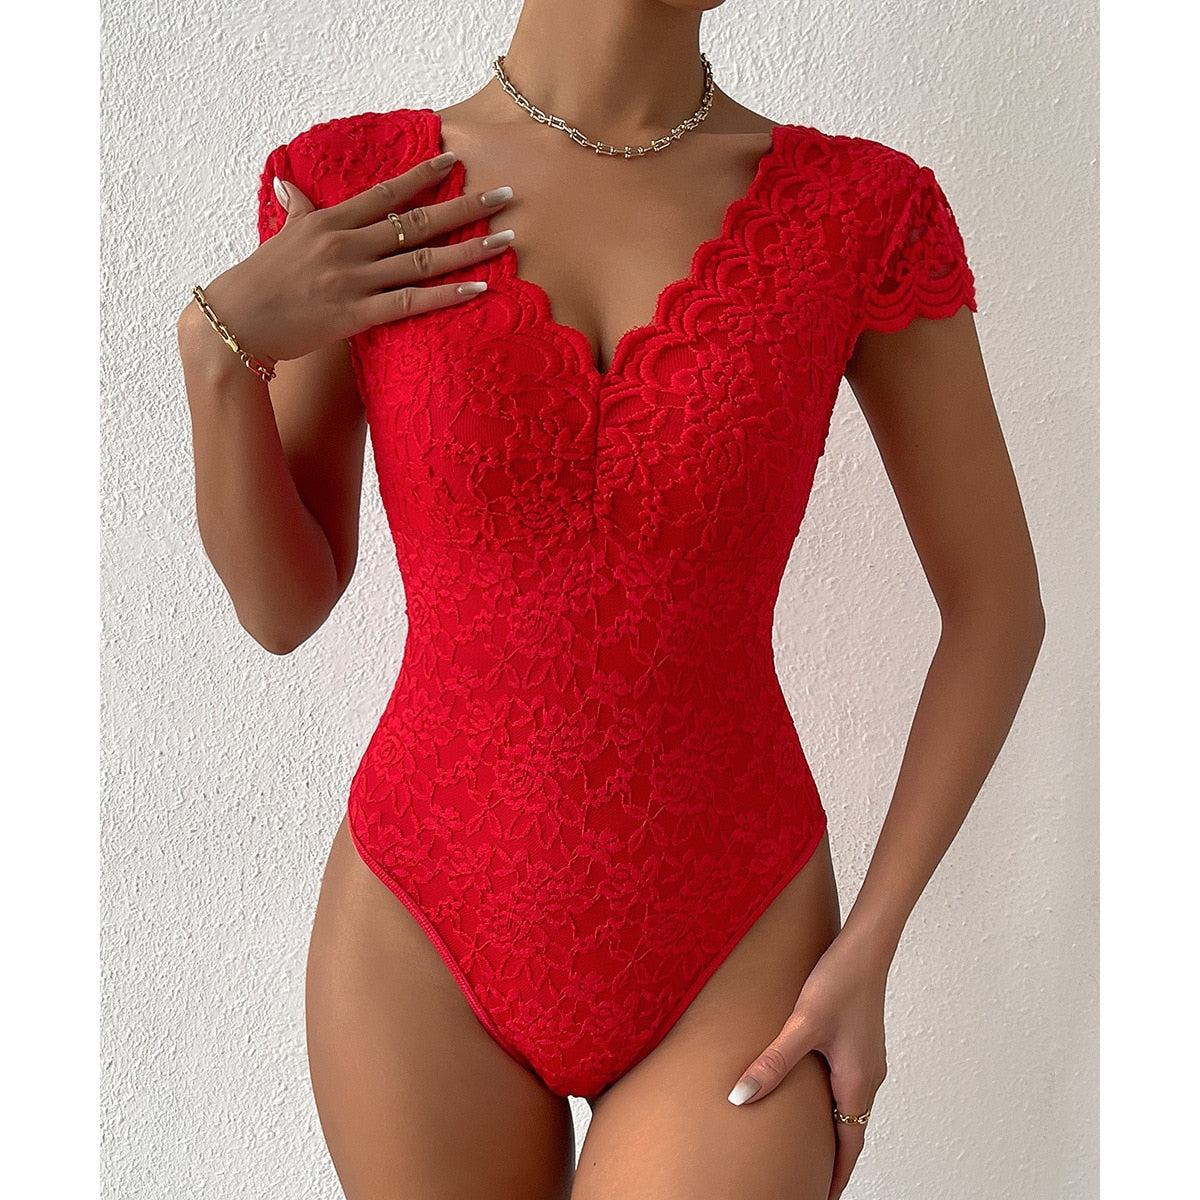 Lace Bodysuit Playsuit Romper Bottom Summer Thin Bodysuits Womens Clothing Ropa De Mujer Sexy Nightclub Overalls Jumpsuit Women 11-10512-red